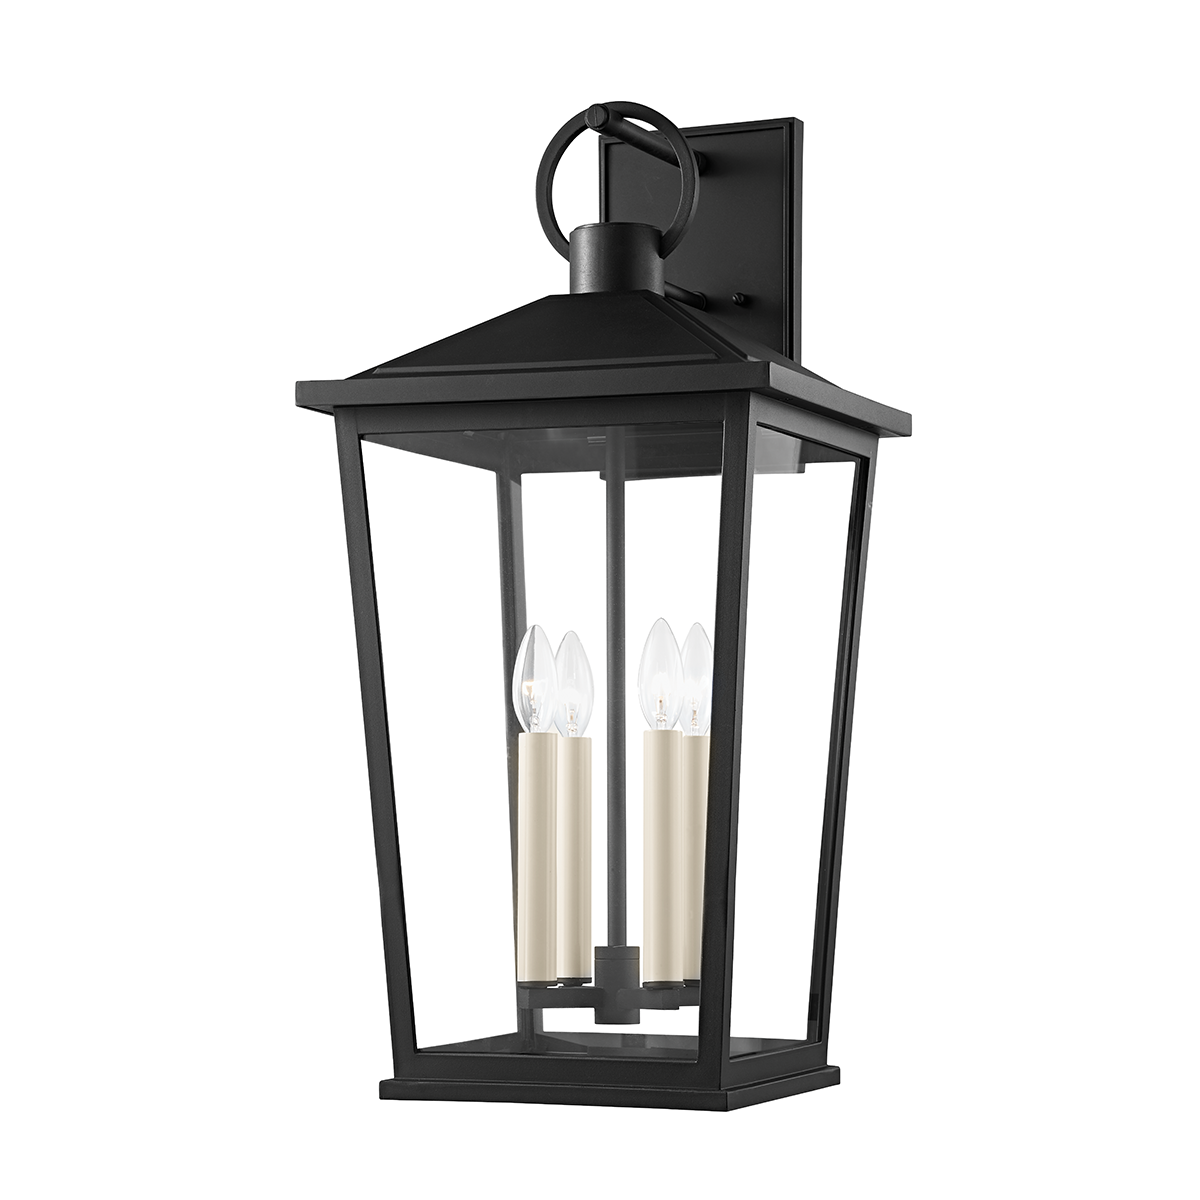 Troy Lighting 4 LIGHT EXTRA LARGE EXTERIOR WALL SCONCE B8904 Outdoor l Wall Troy Lighting TEXTURE BLACK  